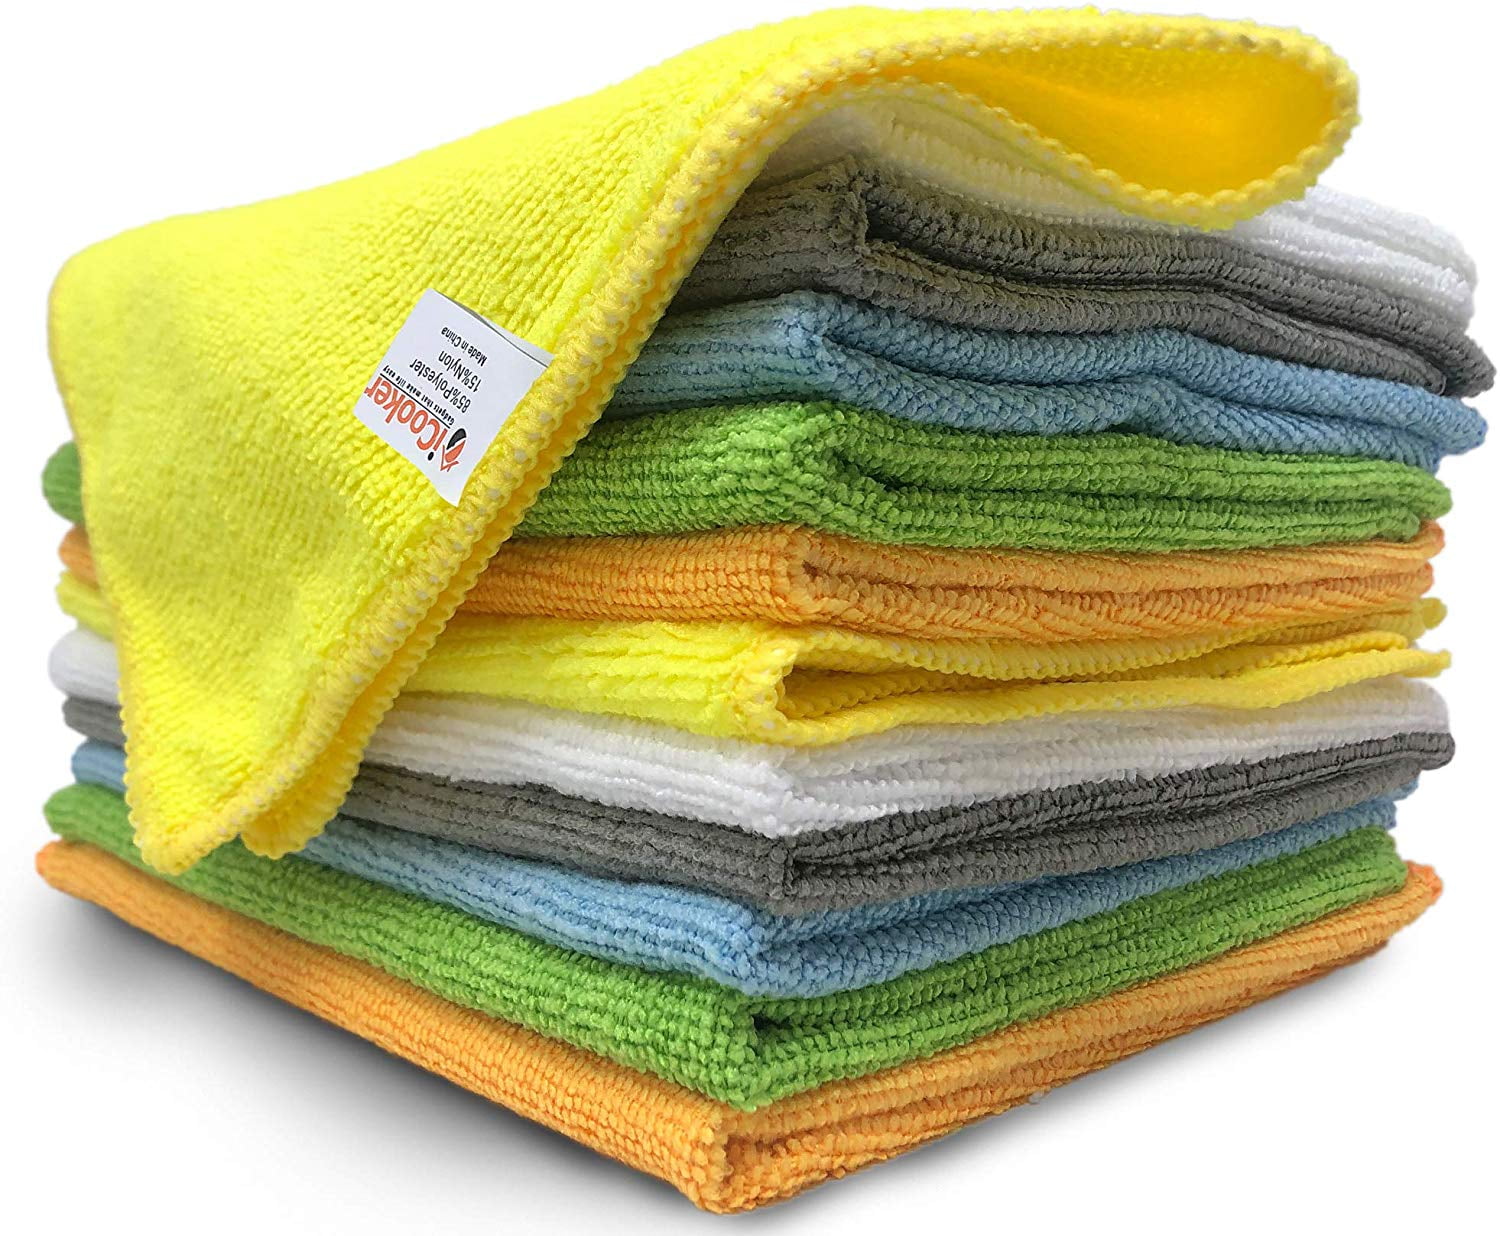 Microfiber Cleaning Cloths 50 Pack Premium Car Cloth Lint Free Free  Cleaning